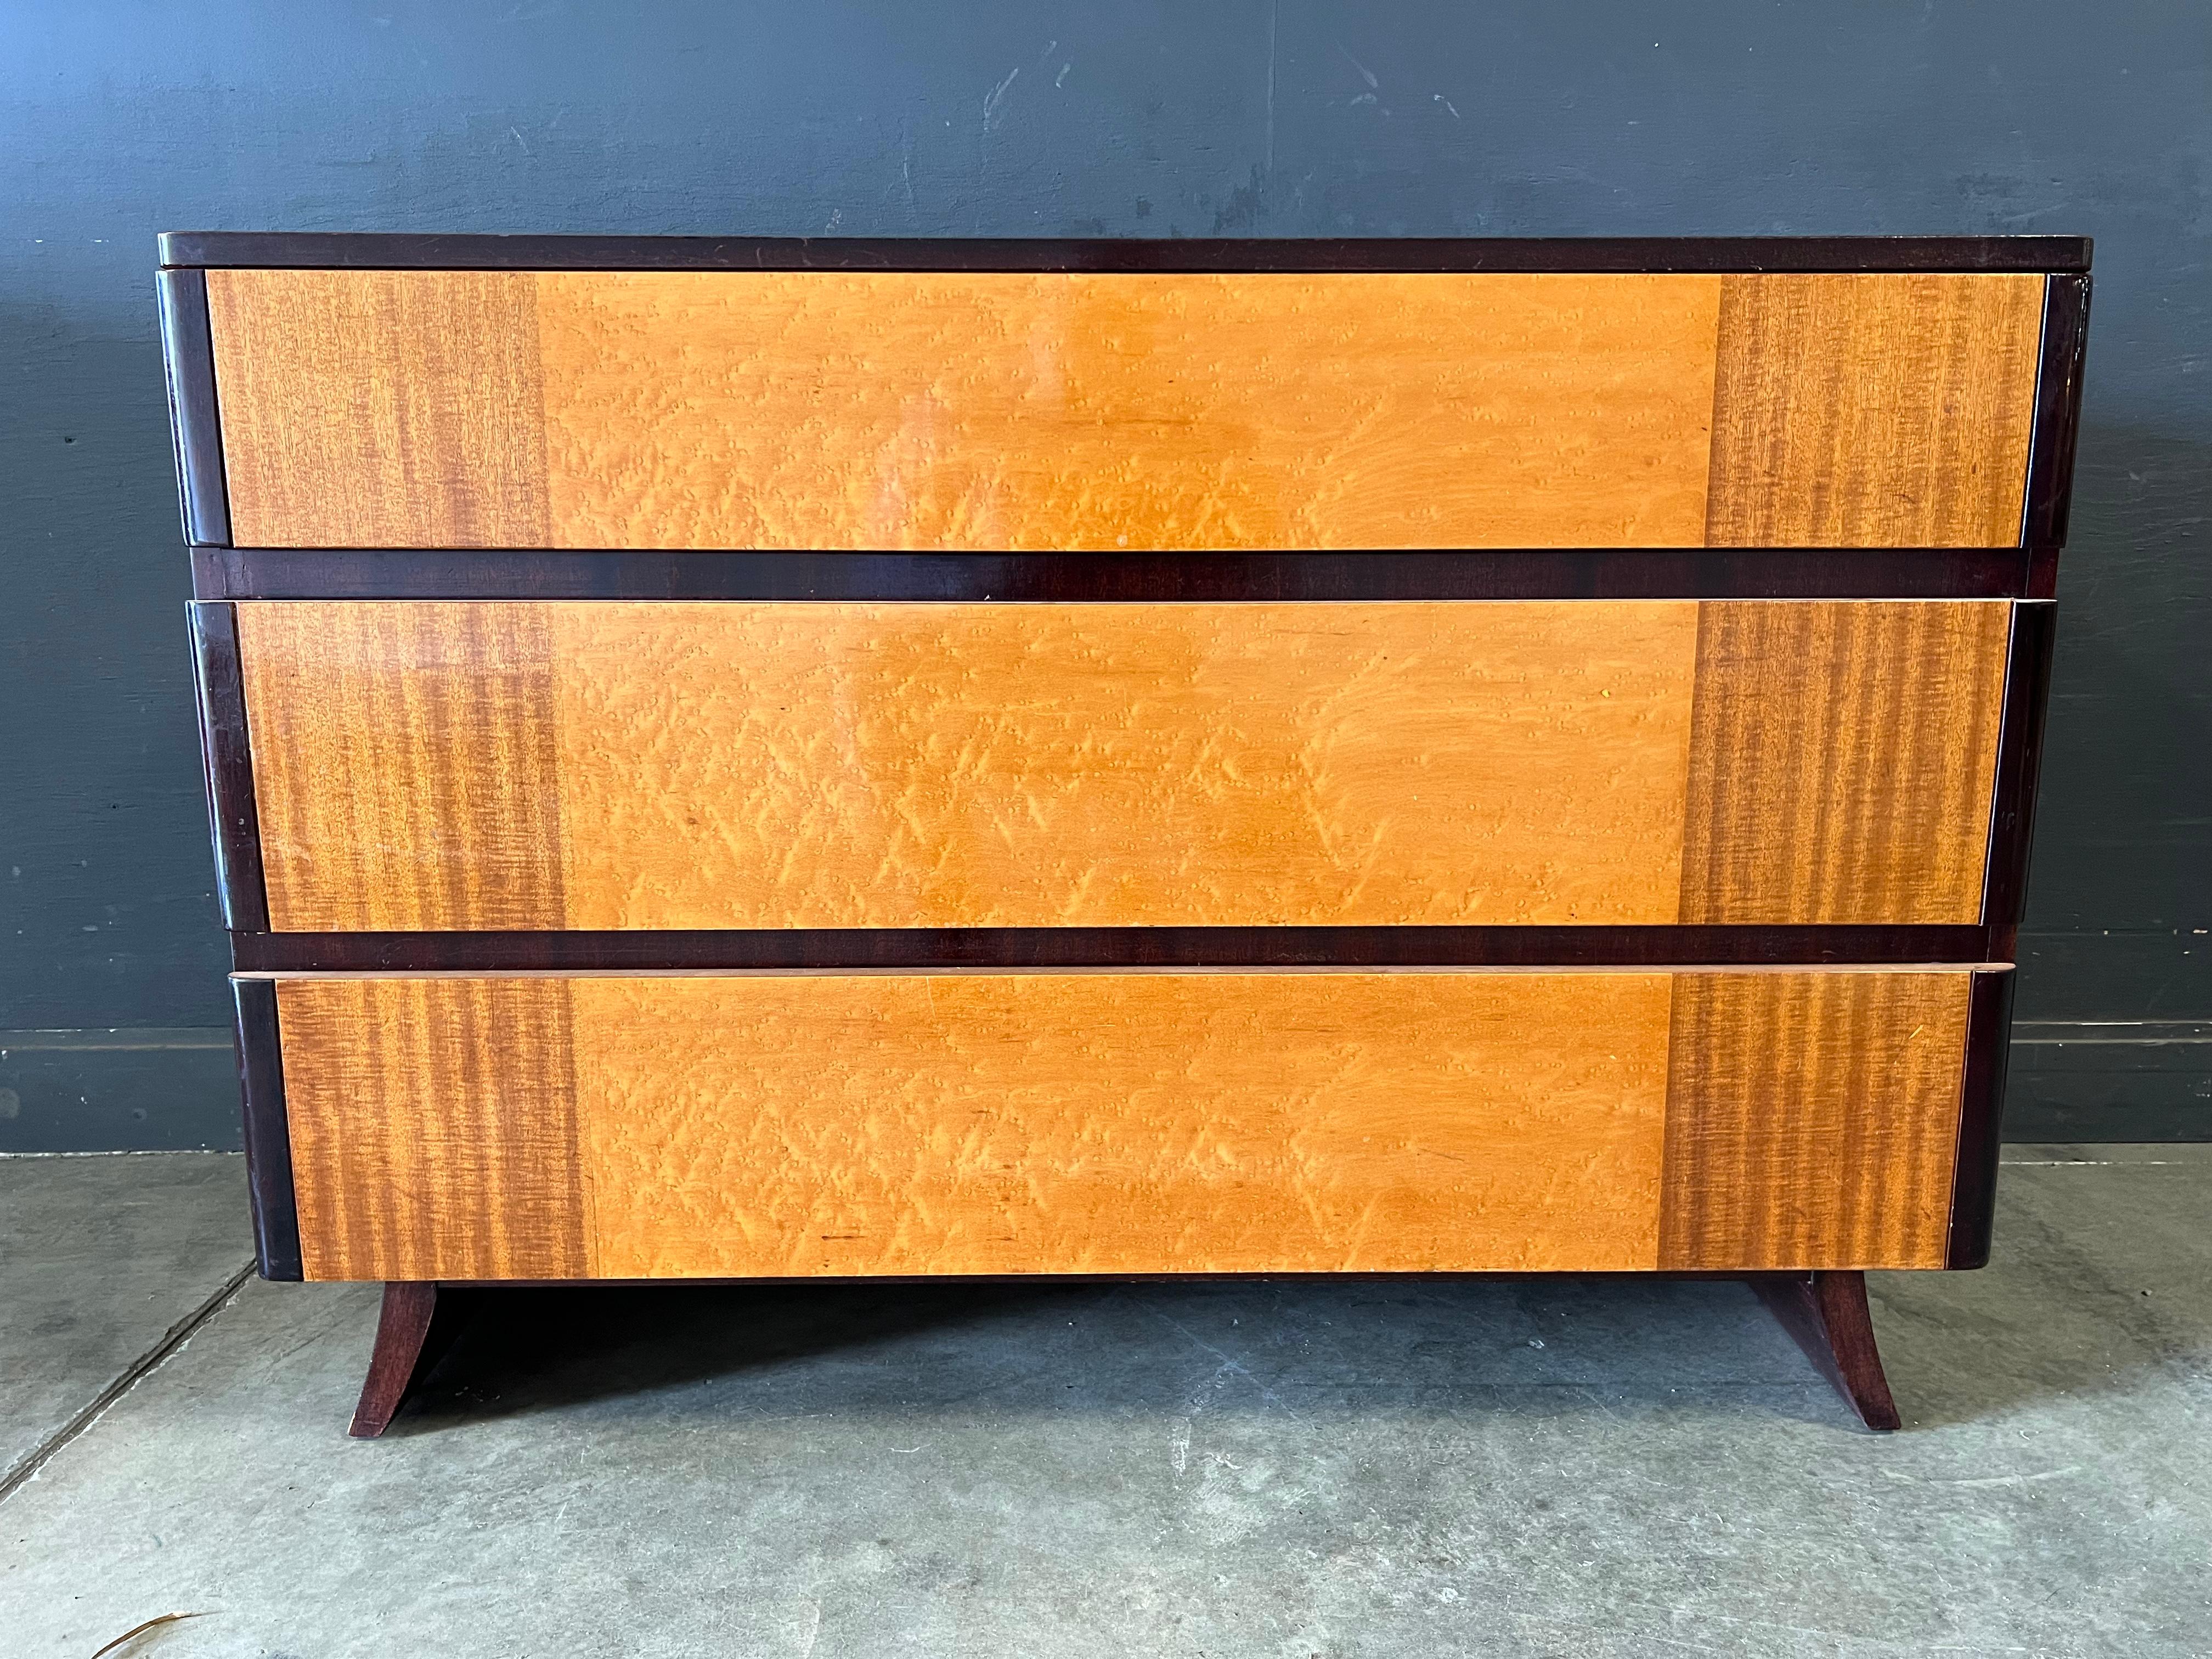 Art Deco, after the period circa 1957, dresser either designed by Eliel Saarinen for R-Way or certainty in the style of. Dresser is available with our other listing for a tall boy dresser. All the pieces are in nice condition but not refinished.